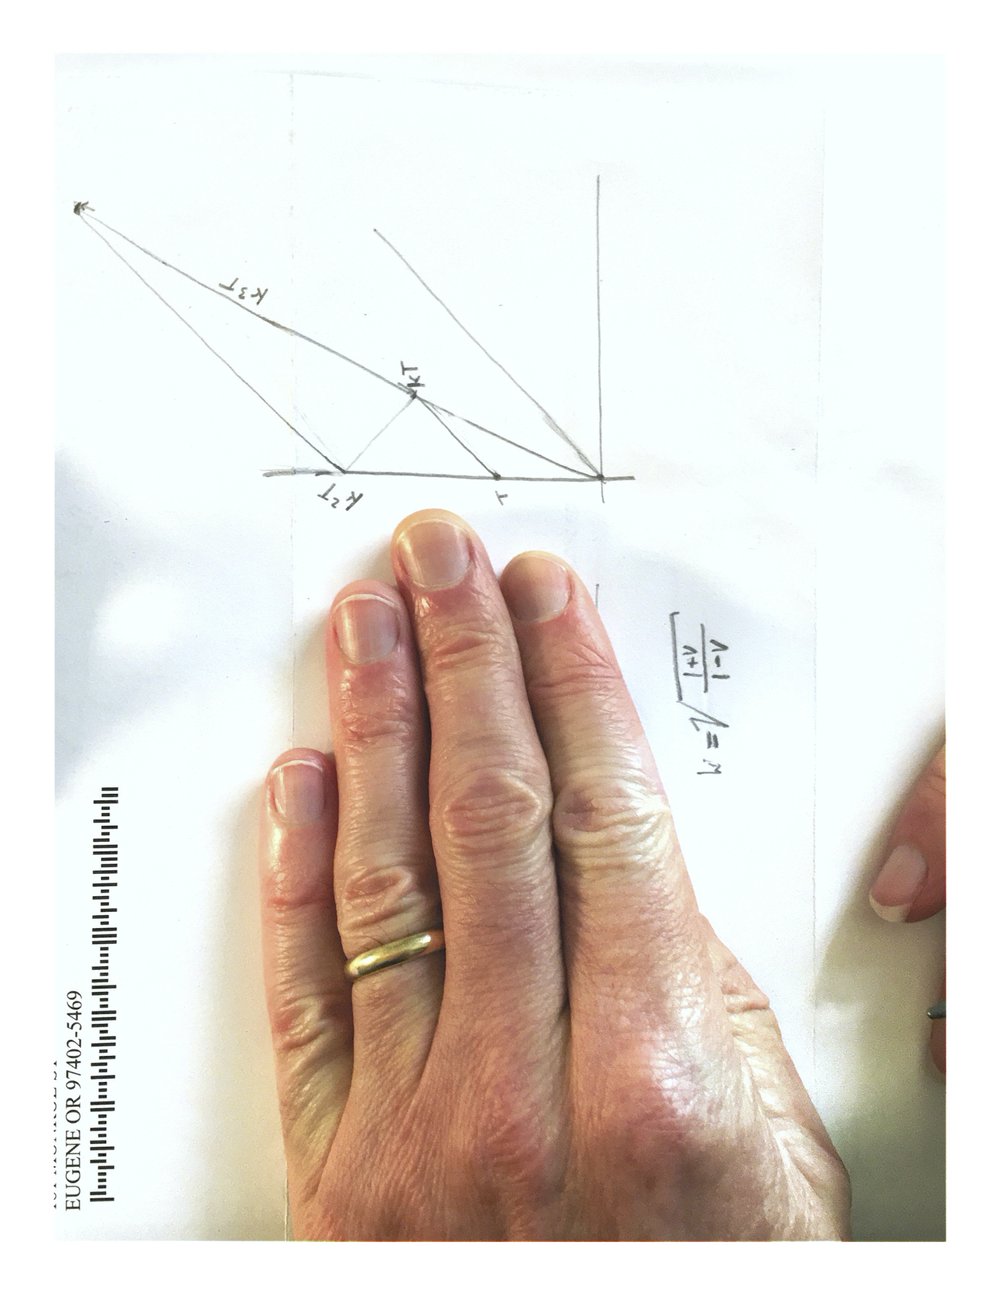 angle of remorse, Tom’s hand and equations